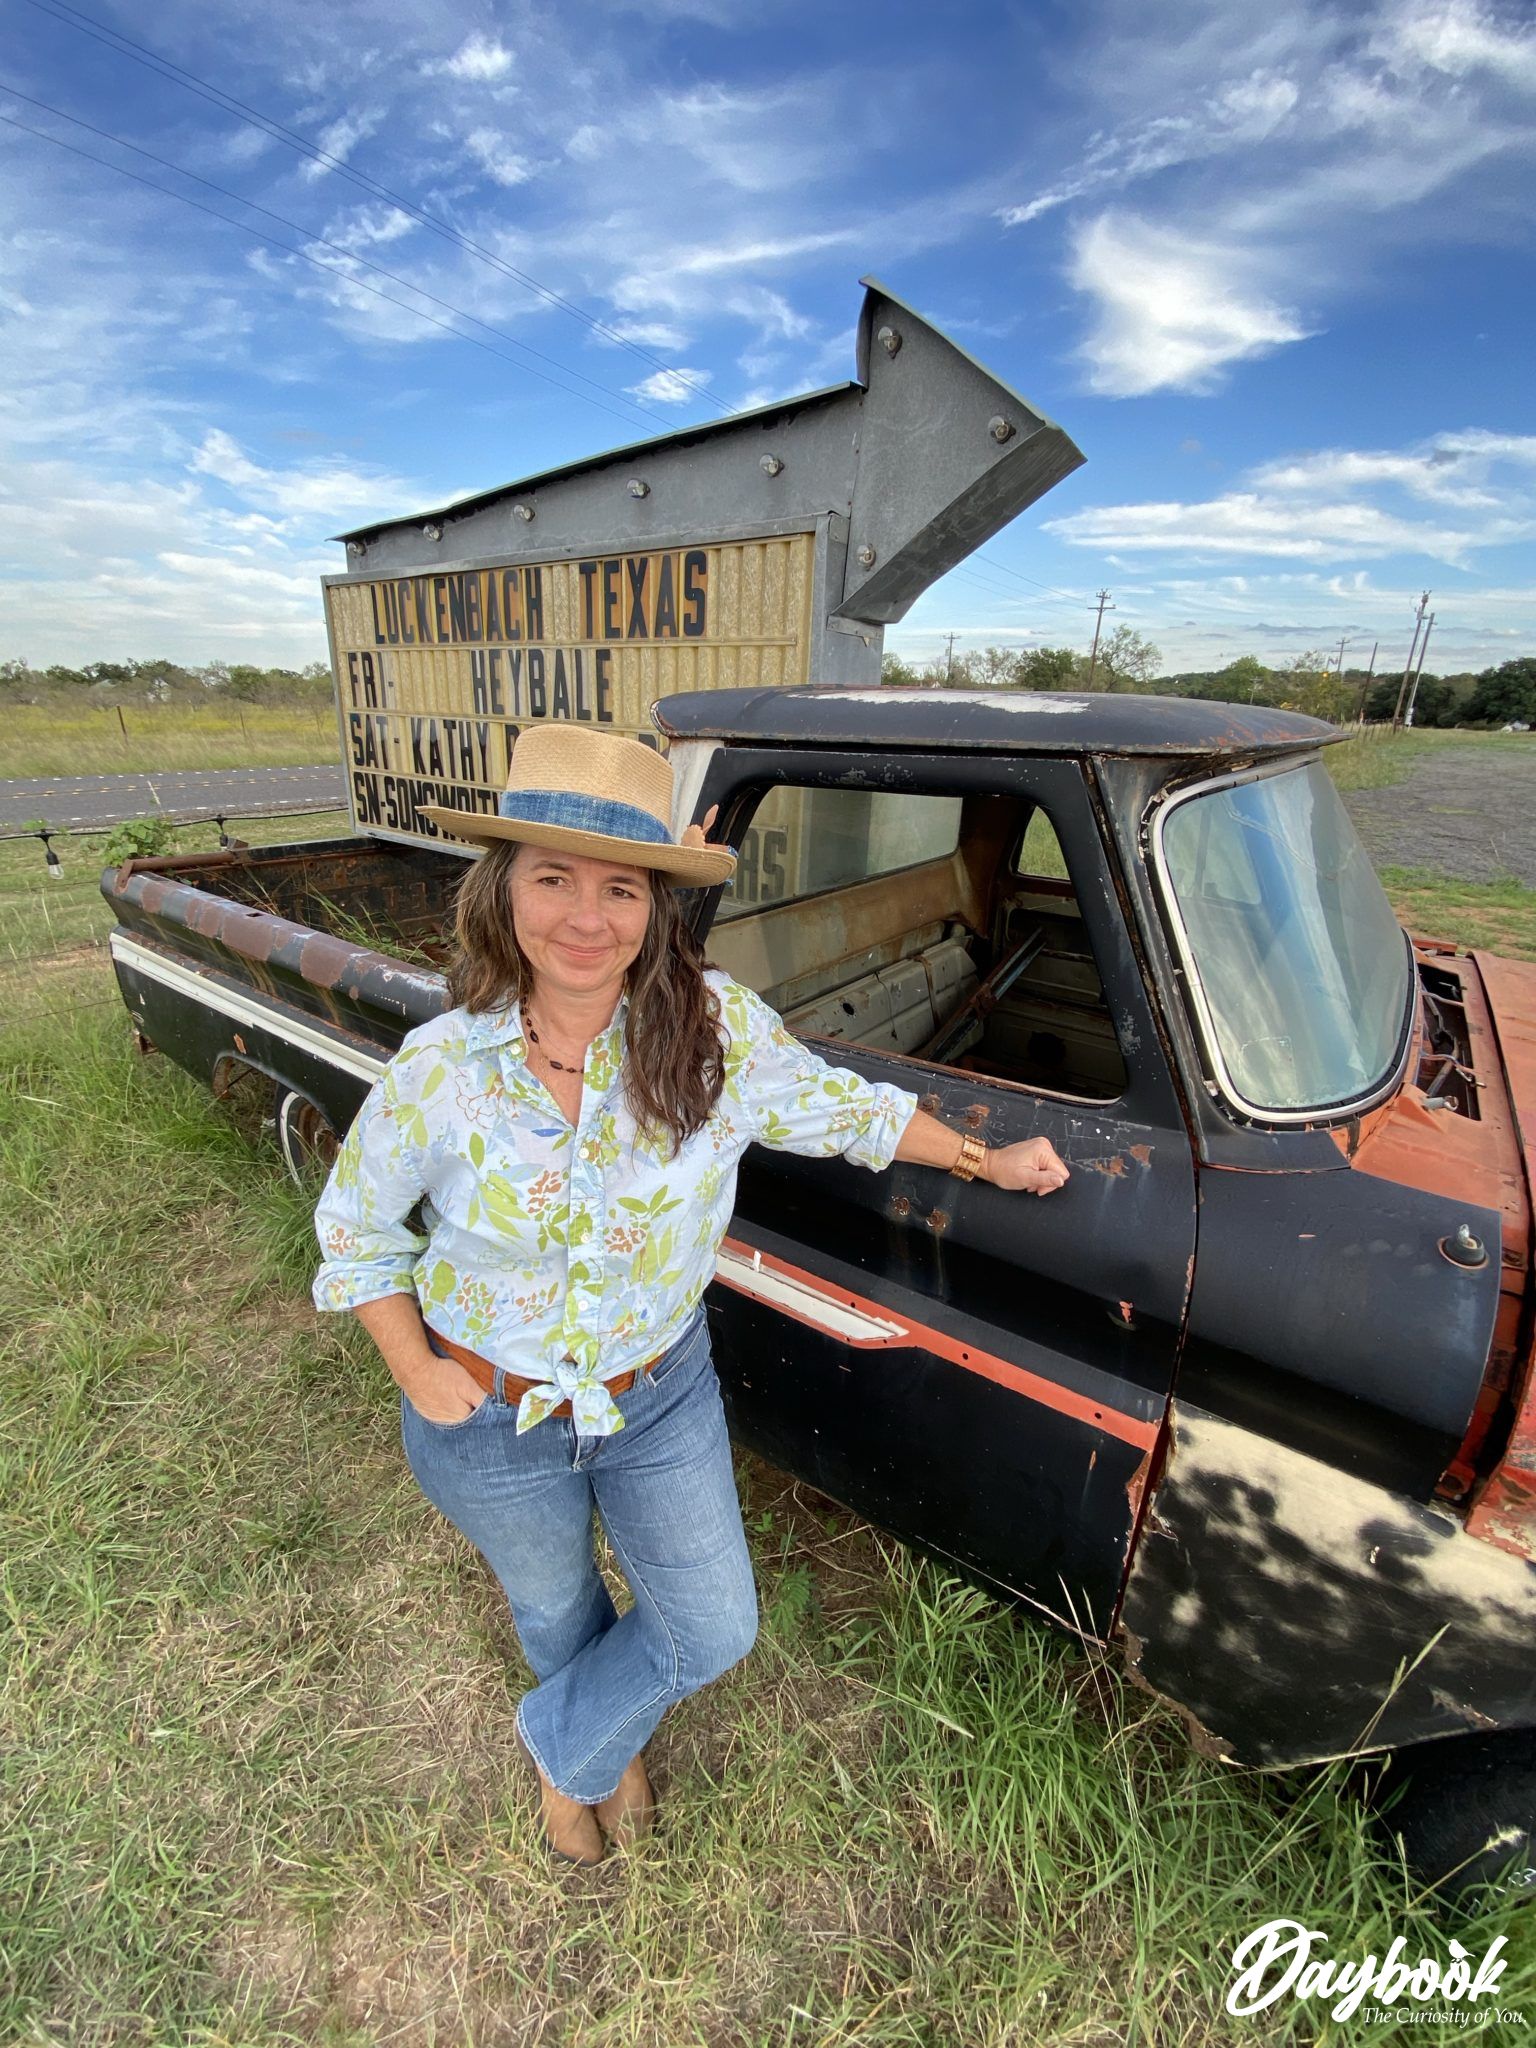 Lady in front of an old truck in Luckenbach, Texas